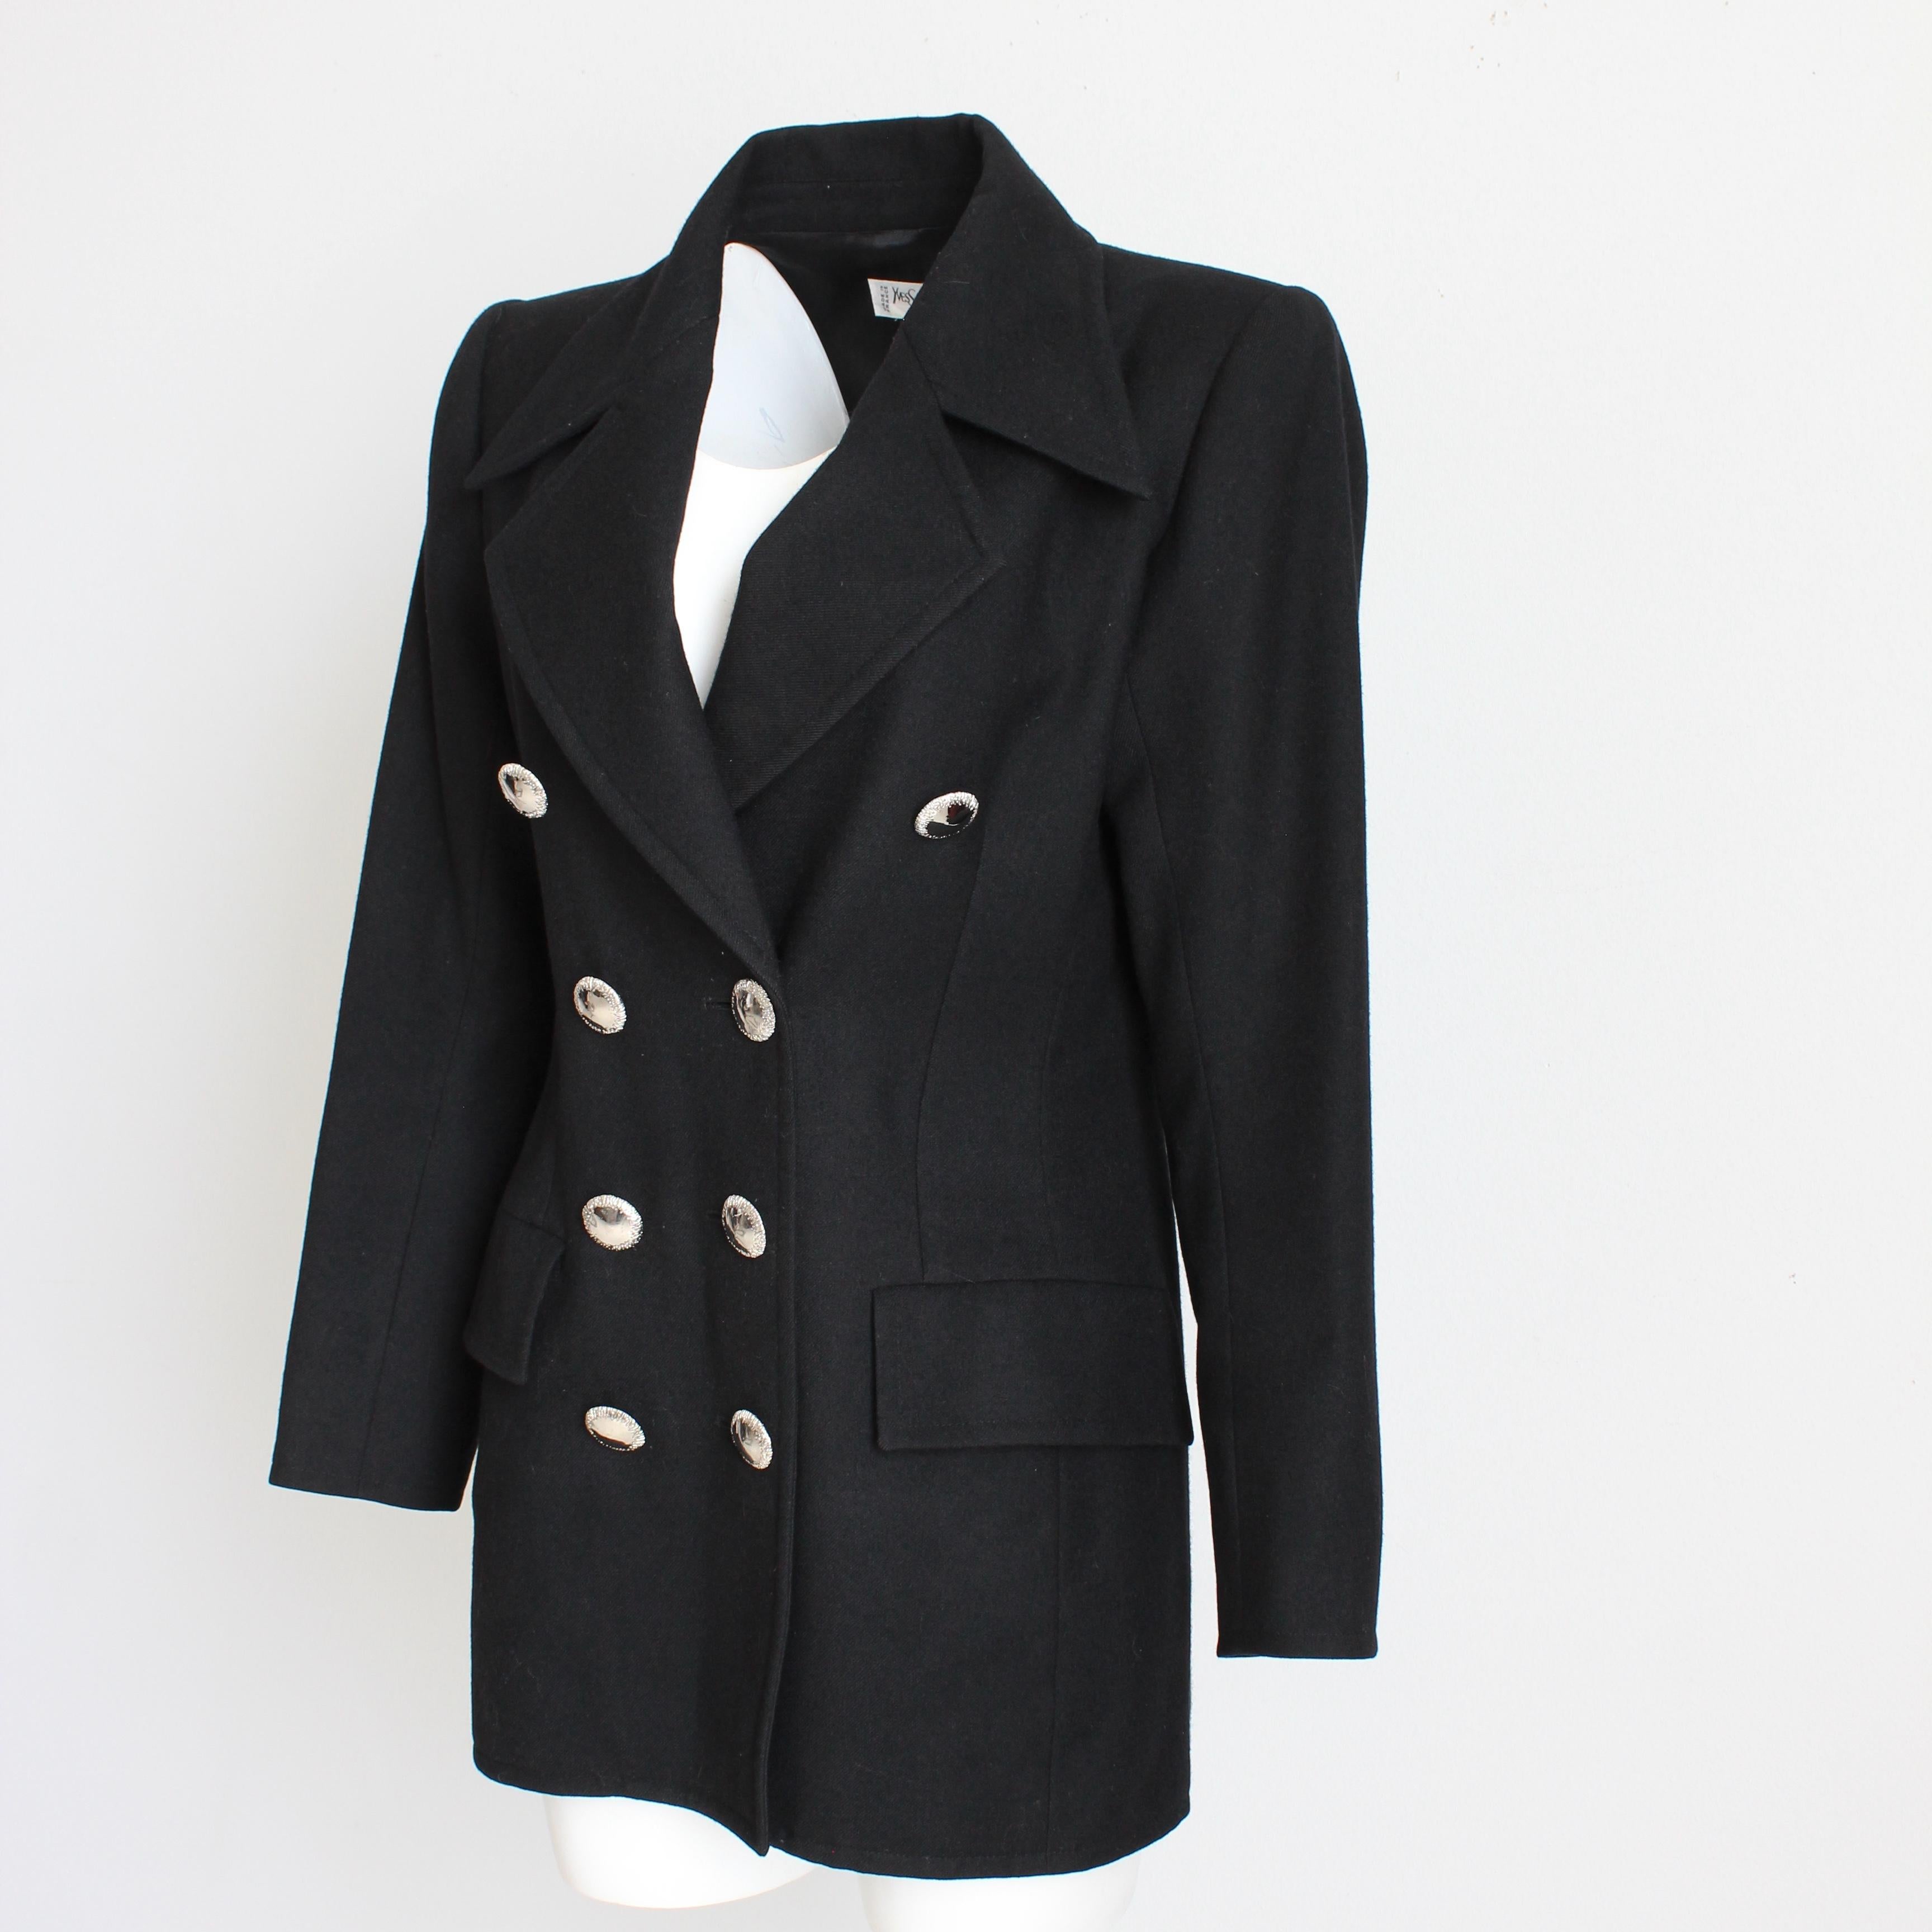 Yves Saint Laurent Jacket Black Wool Double Breasted Pea Coat Style Vintage 90s For Sale 3